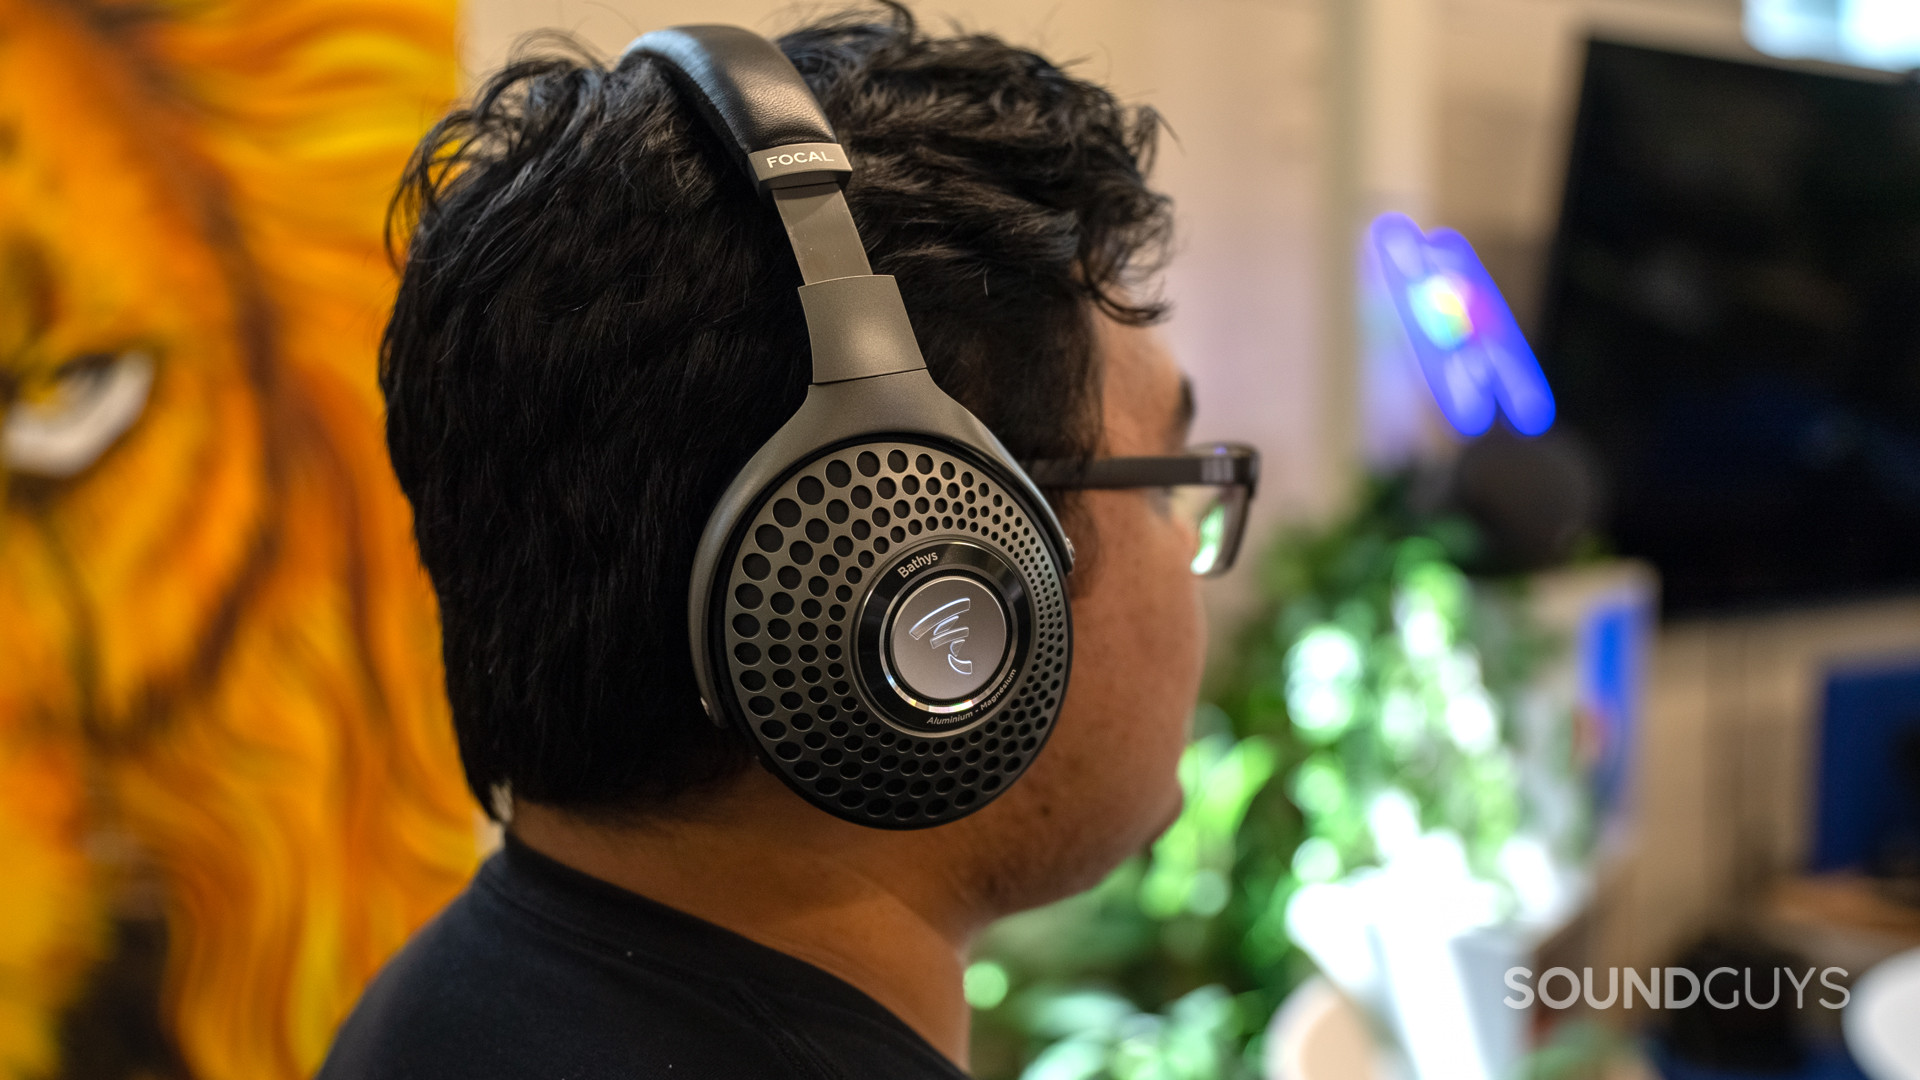 Focal Bathys: Unapologetically Luxurious Noise-Cancelling Headphones for  Audiophiles on the Go